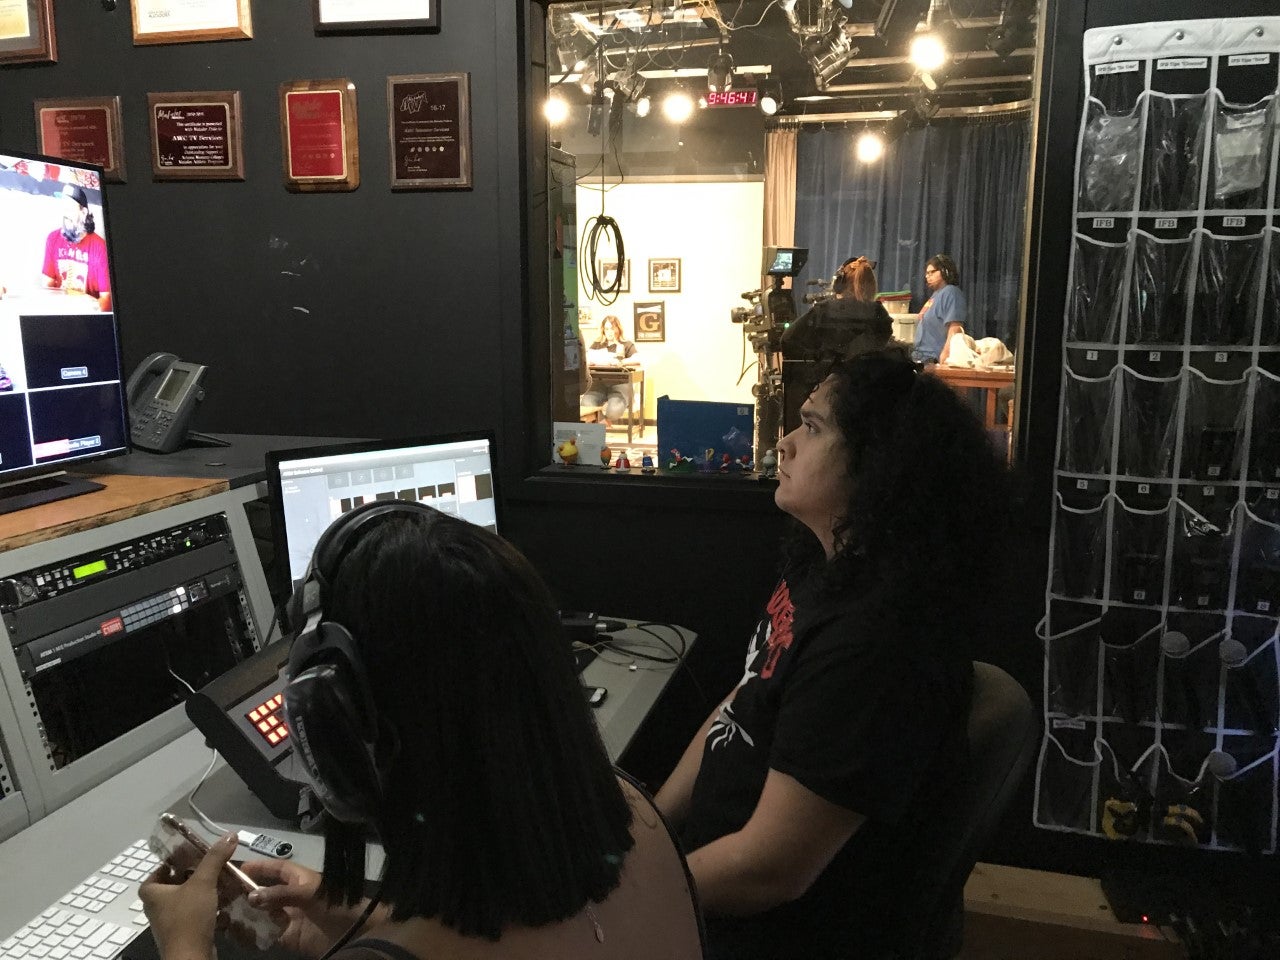 Students are seated by computers, working on the production of the show